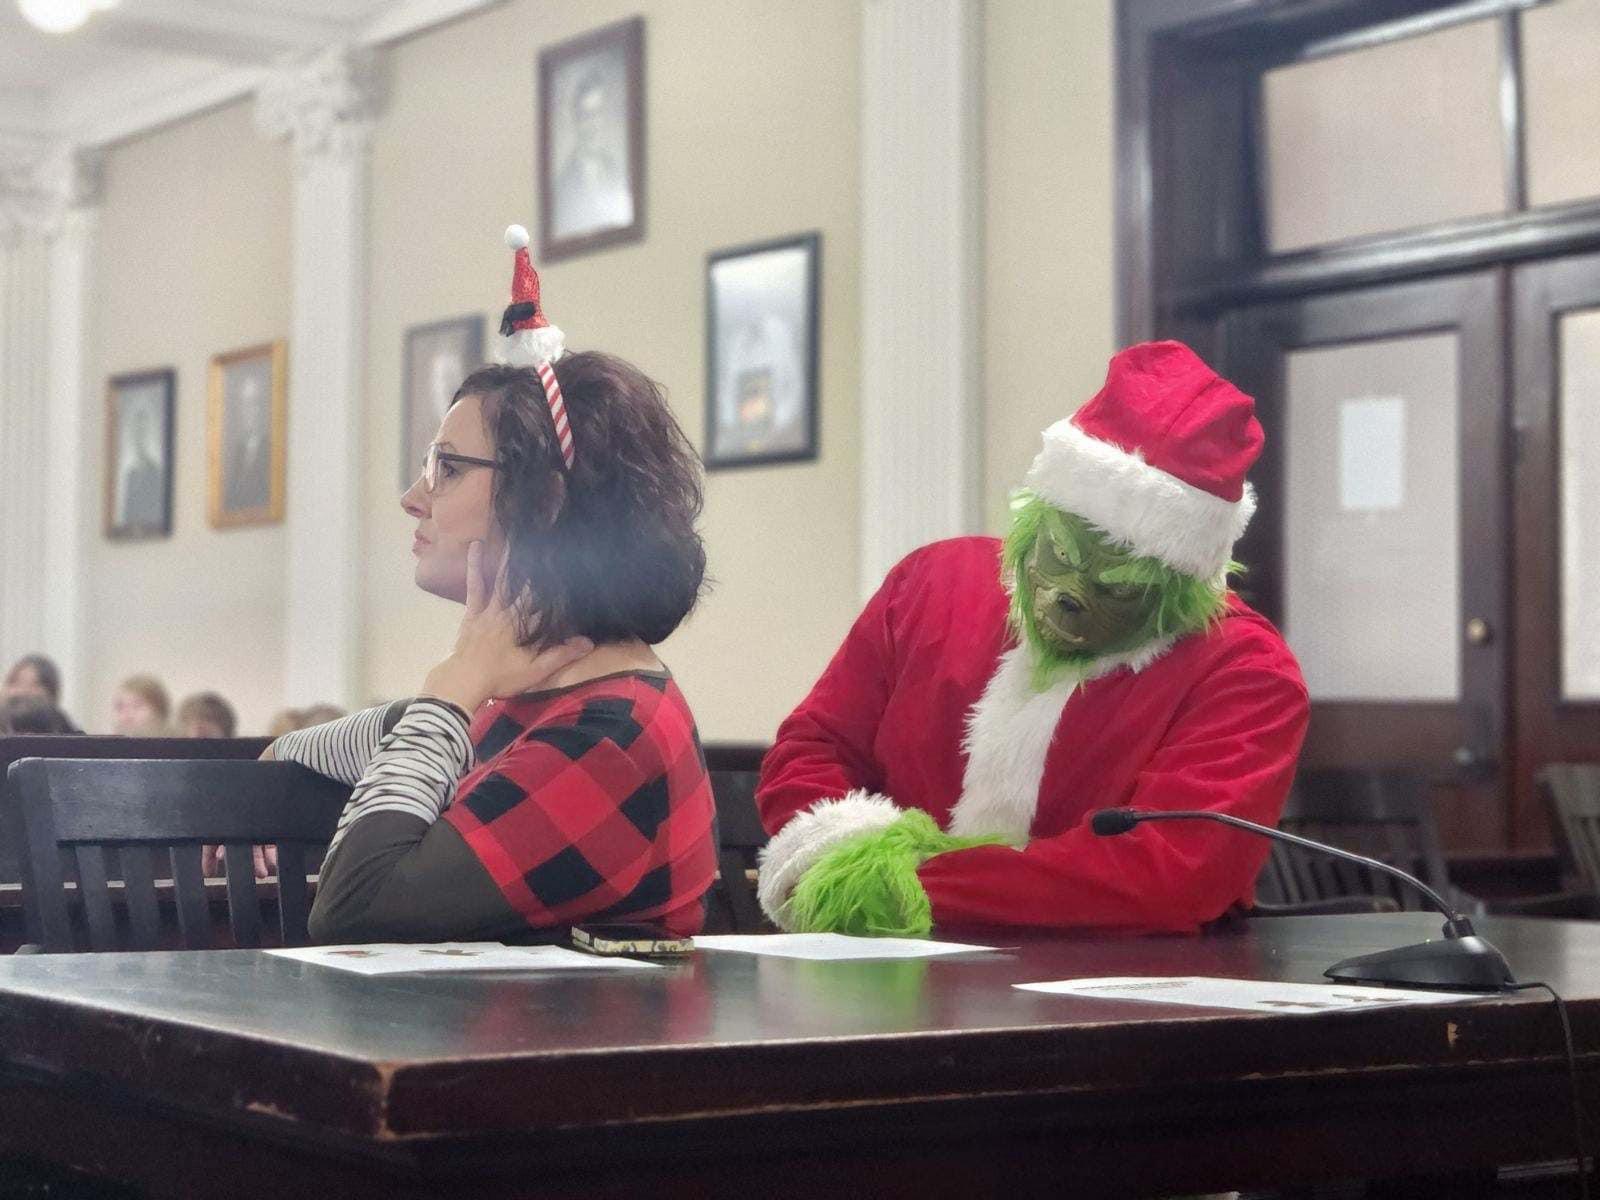 Juvenile Officer Shaunna Stallo with the Grinch